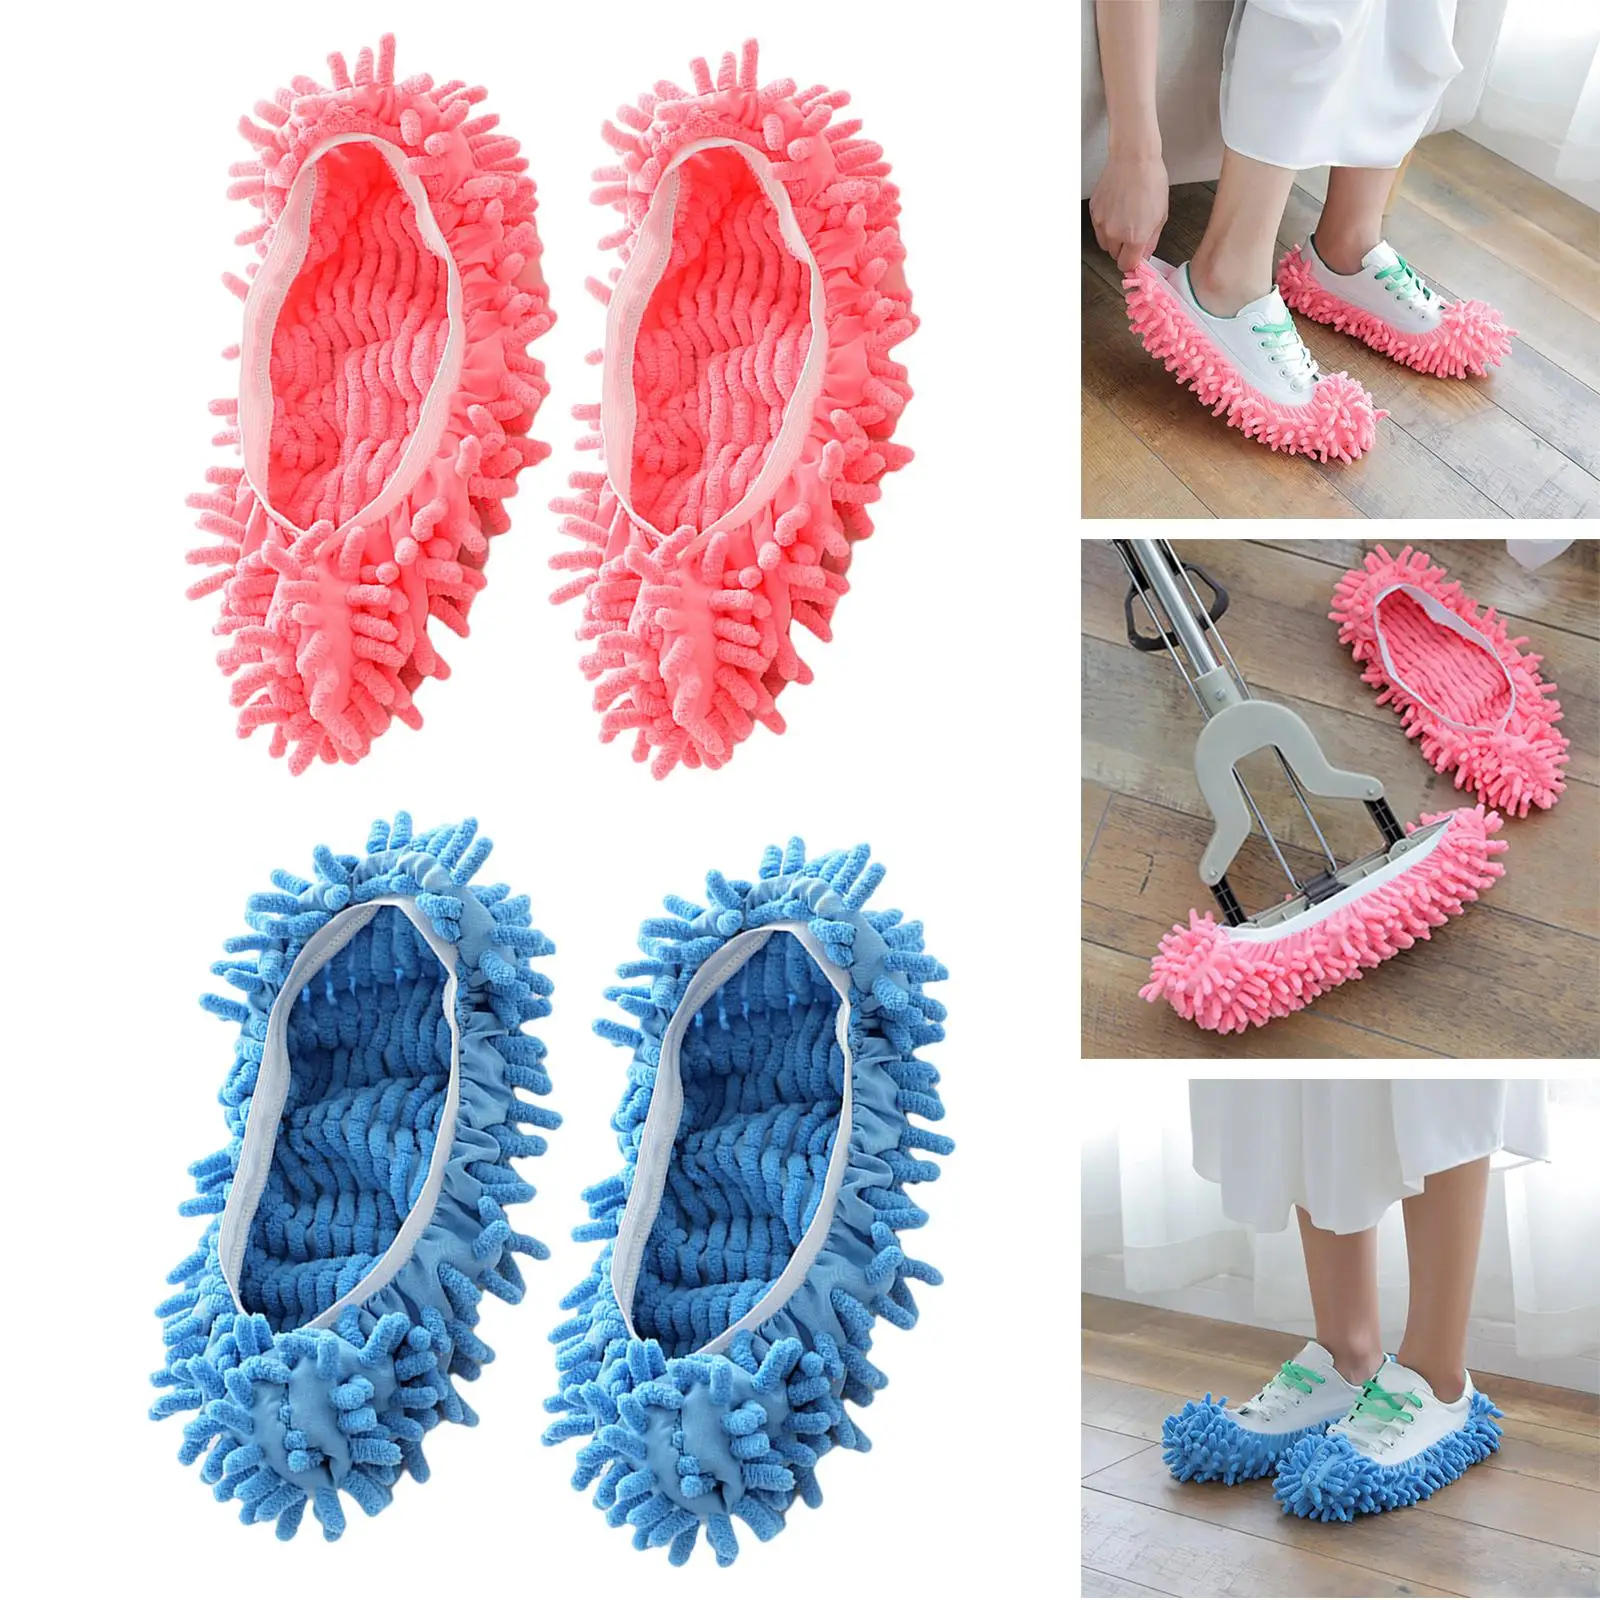 1x Lazy Dusting Cleaning Foot Cleaner Shoe Mop Slipper X7R7 Cover Polishing Q5S1 